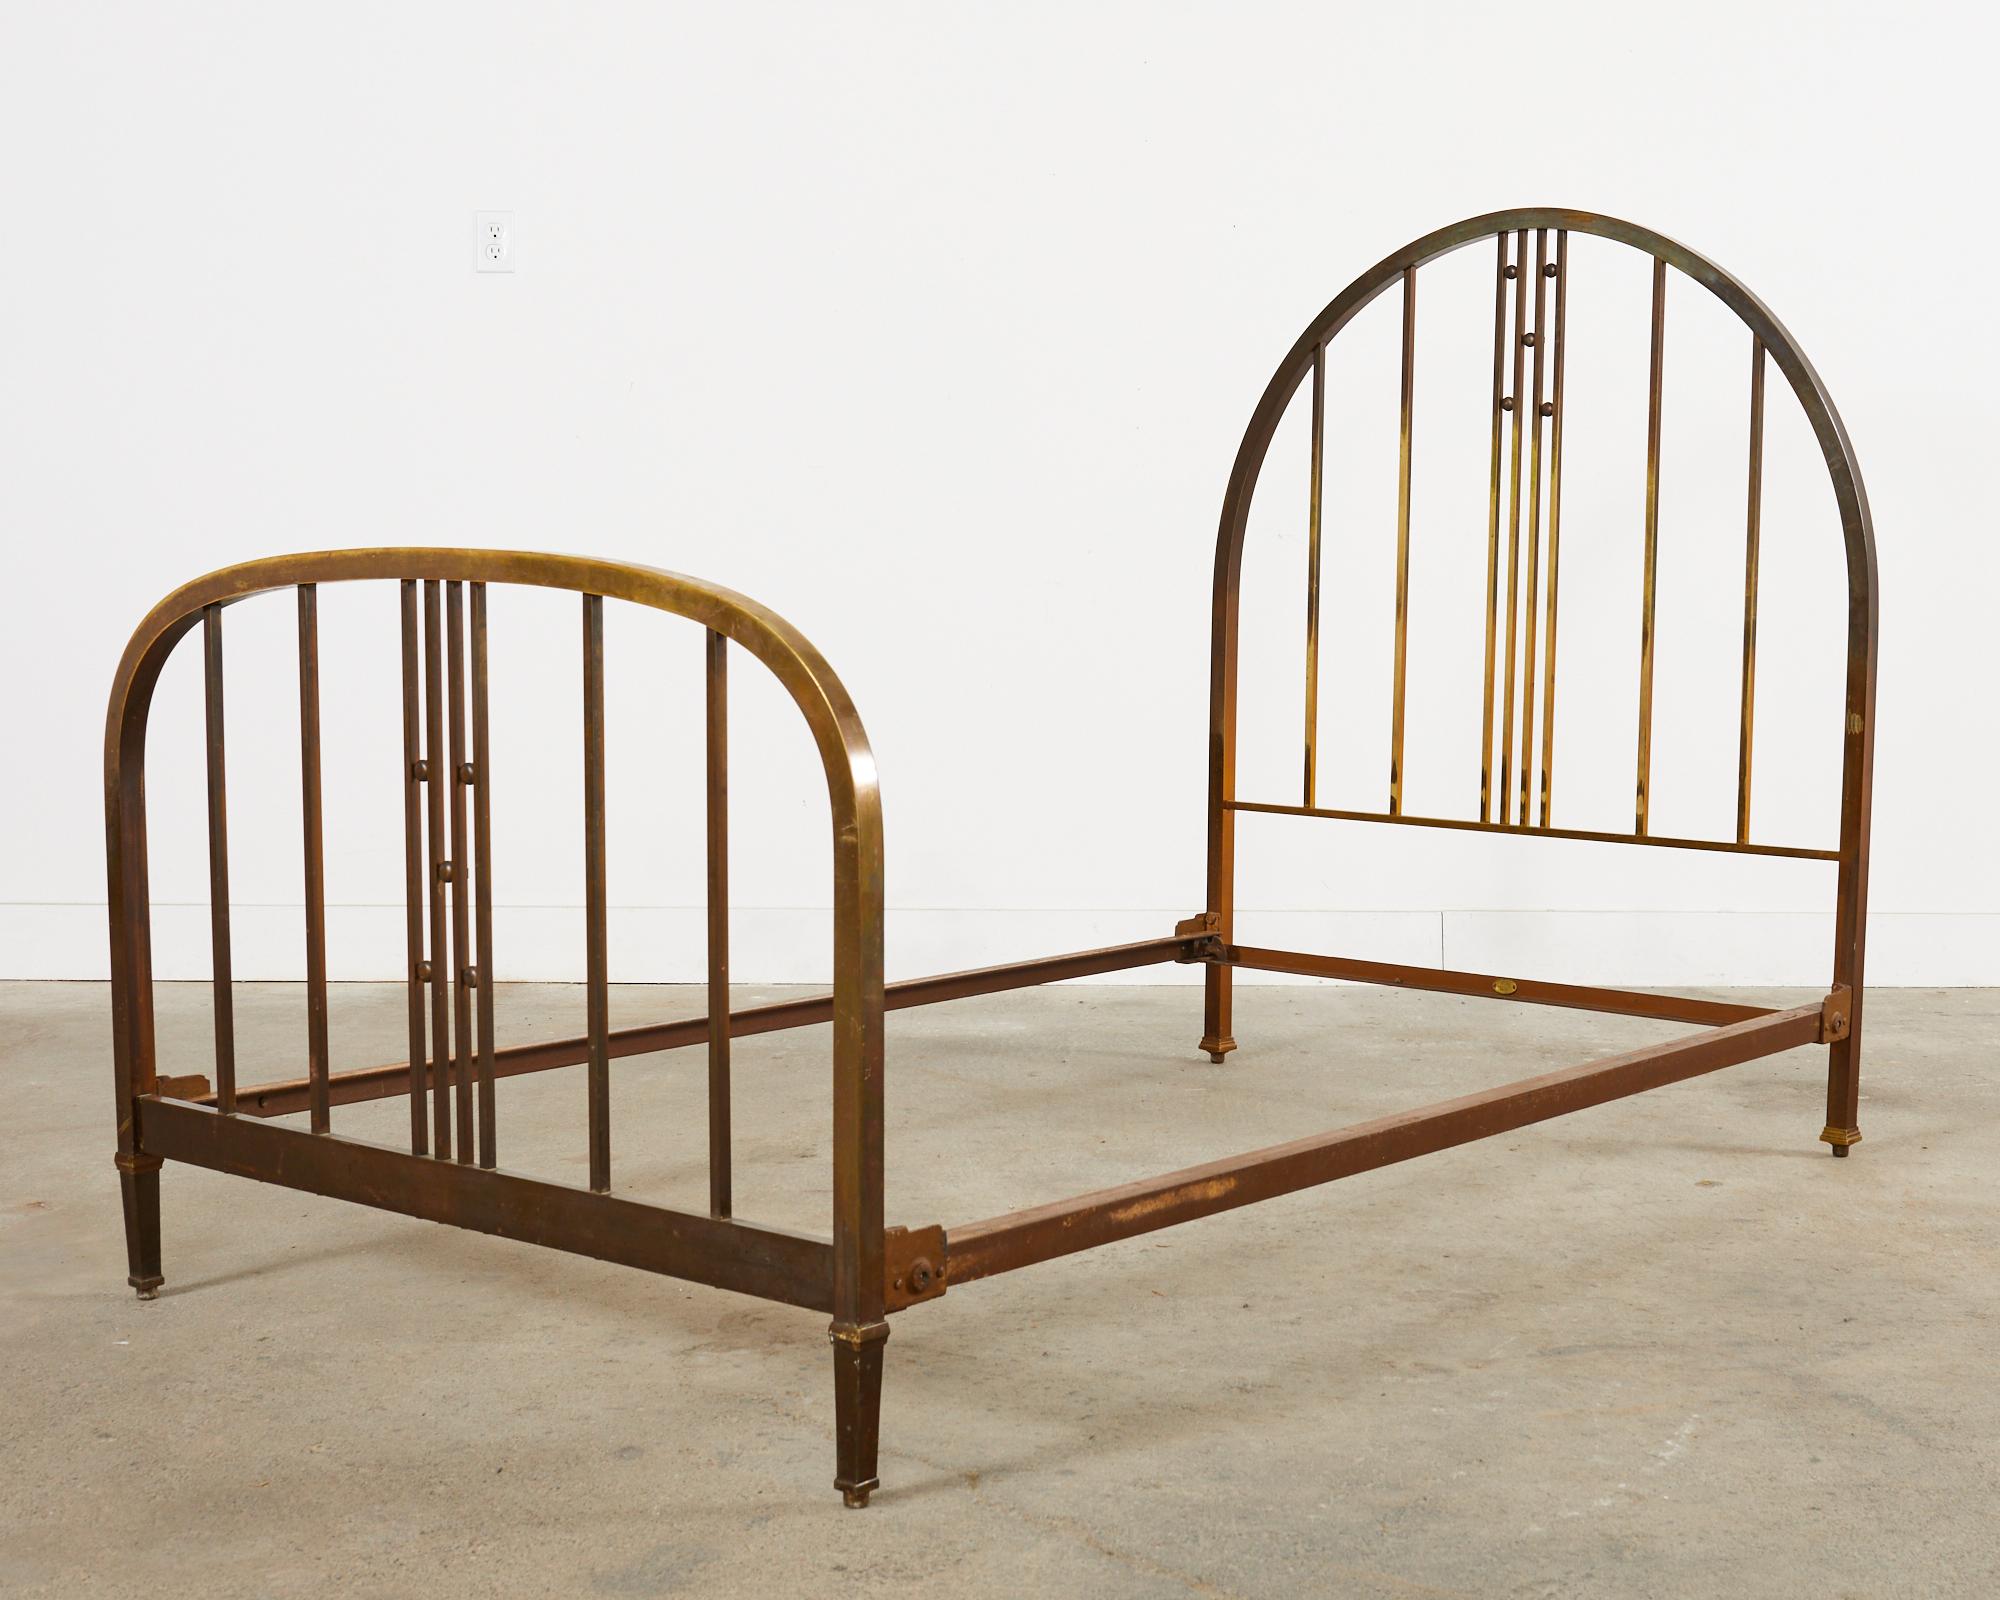 Gracefully curved French art deco bed frame constructed from patinated brass and iron. The bed features a cathedral arch formed headboard having vertical slats decorated with brass orbs or spheres. The curved footboard has a similar design of slats